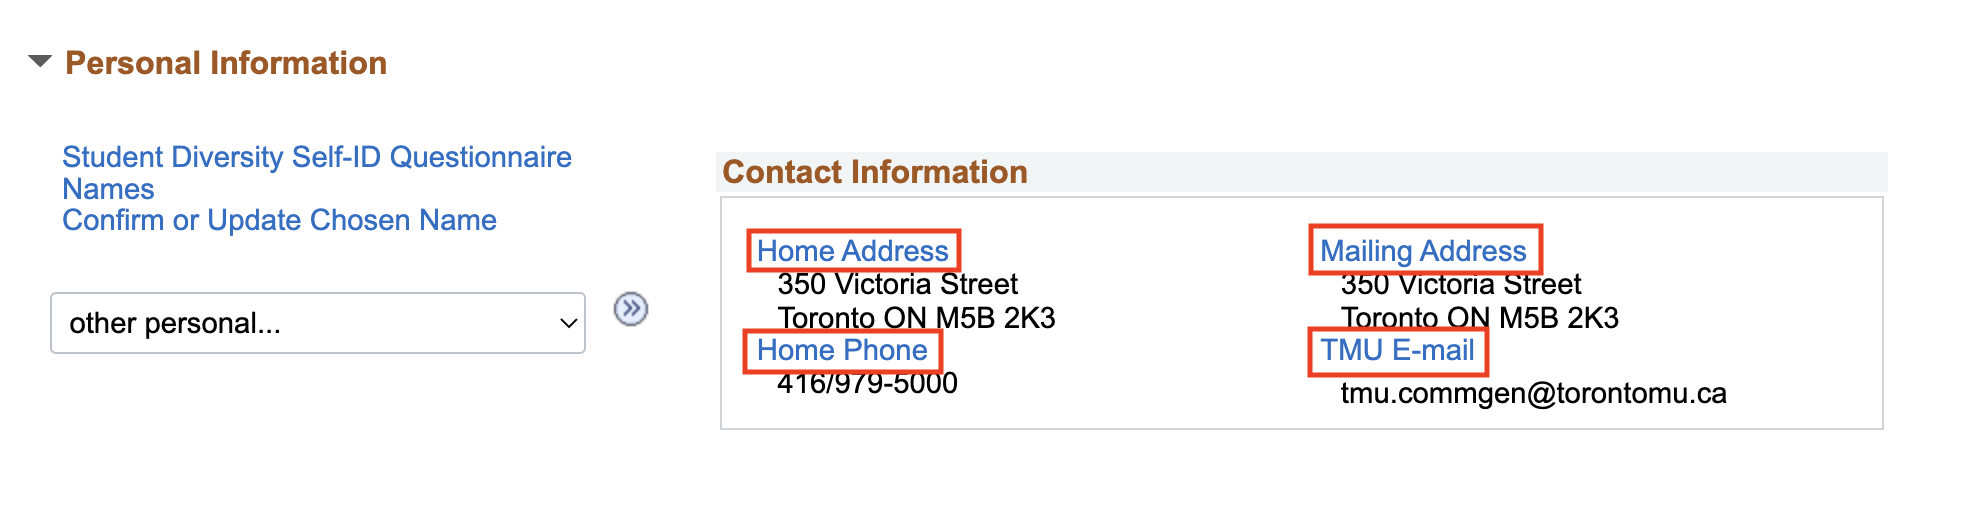 Home Address, Mailing Address, Cellular Phone and Home Email quick links under MyServiceHub Contact Information.